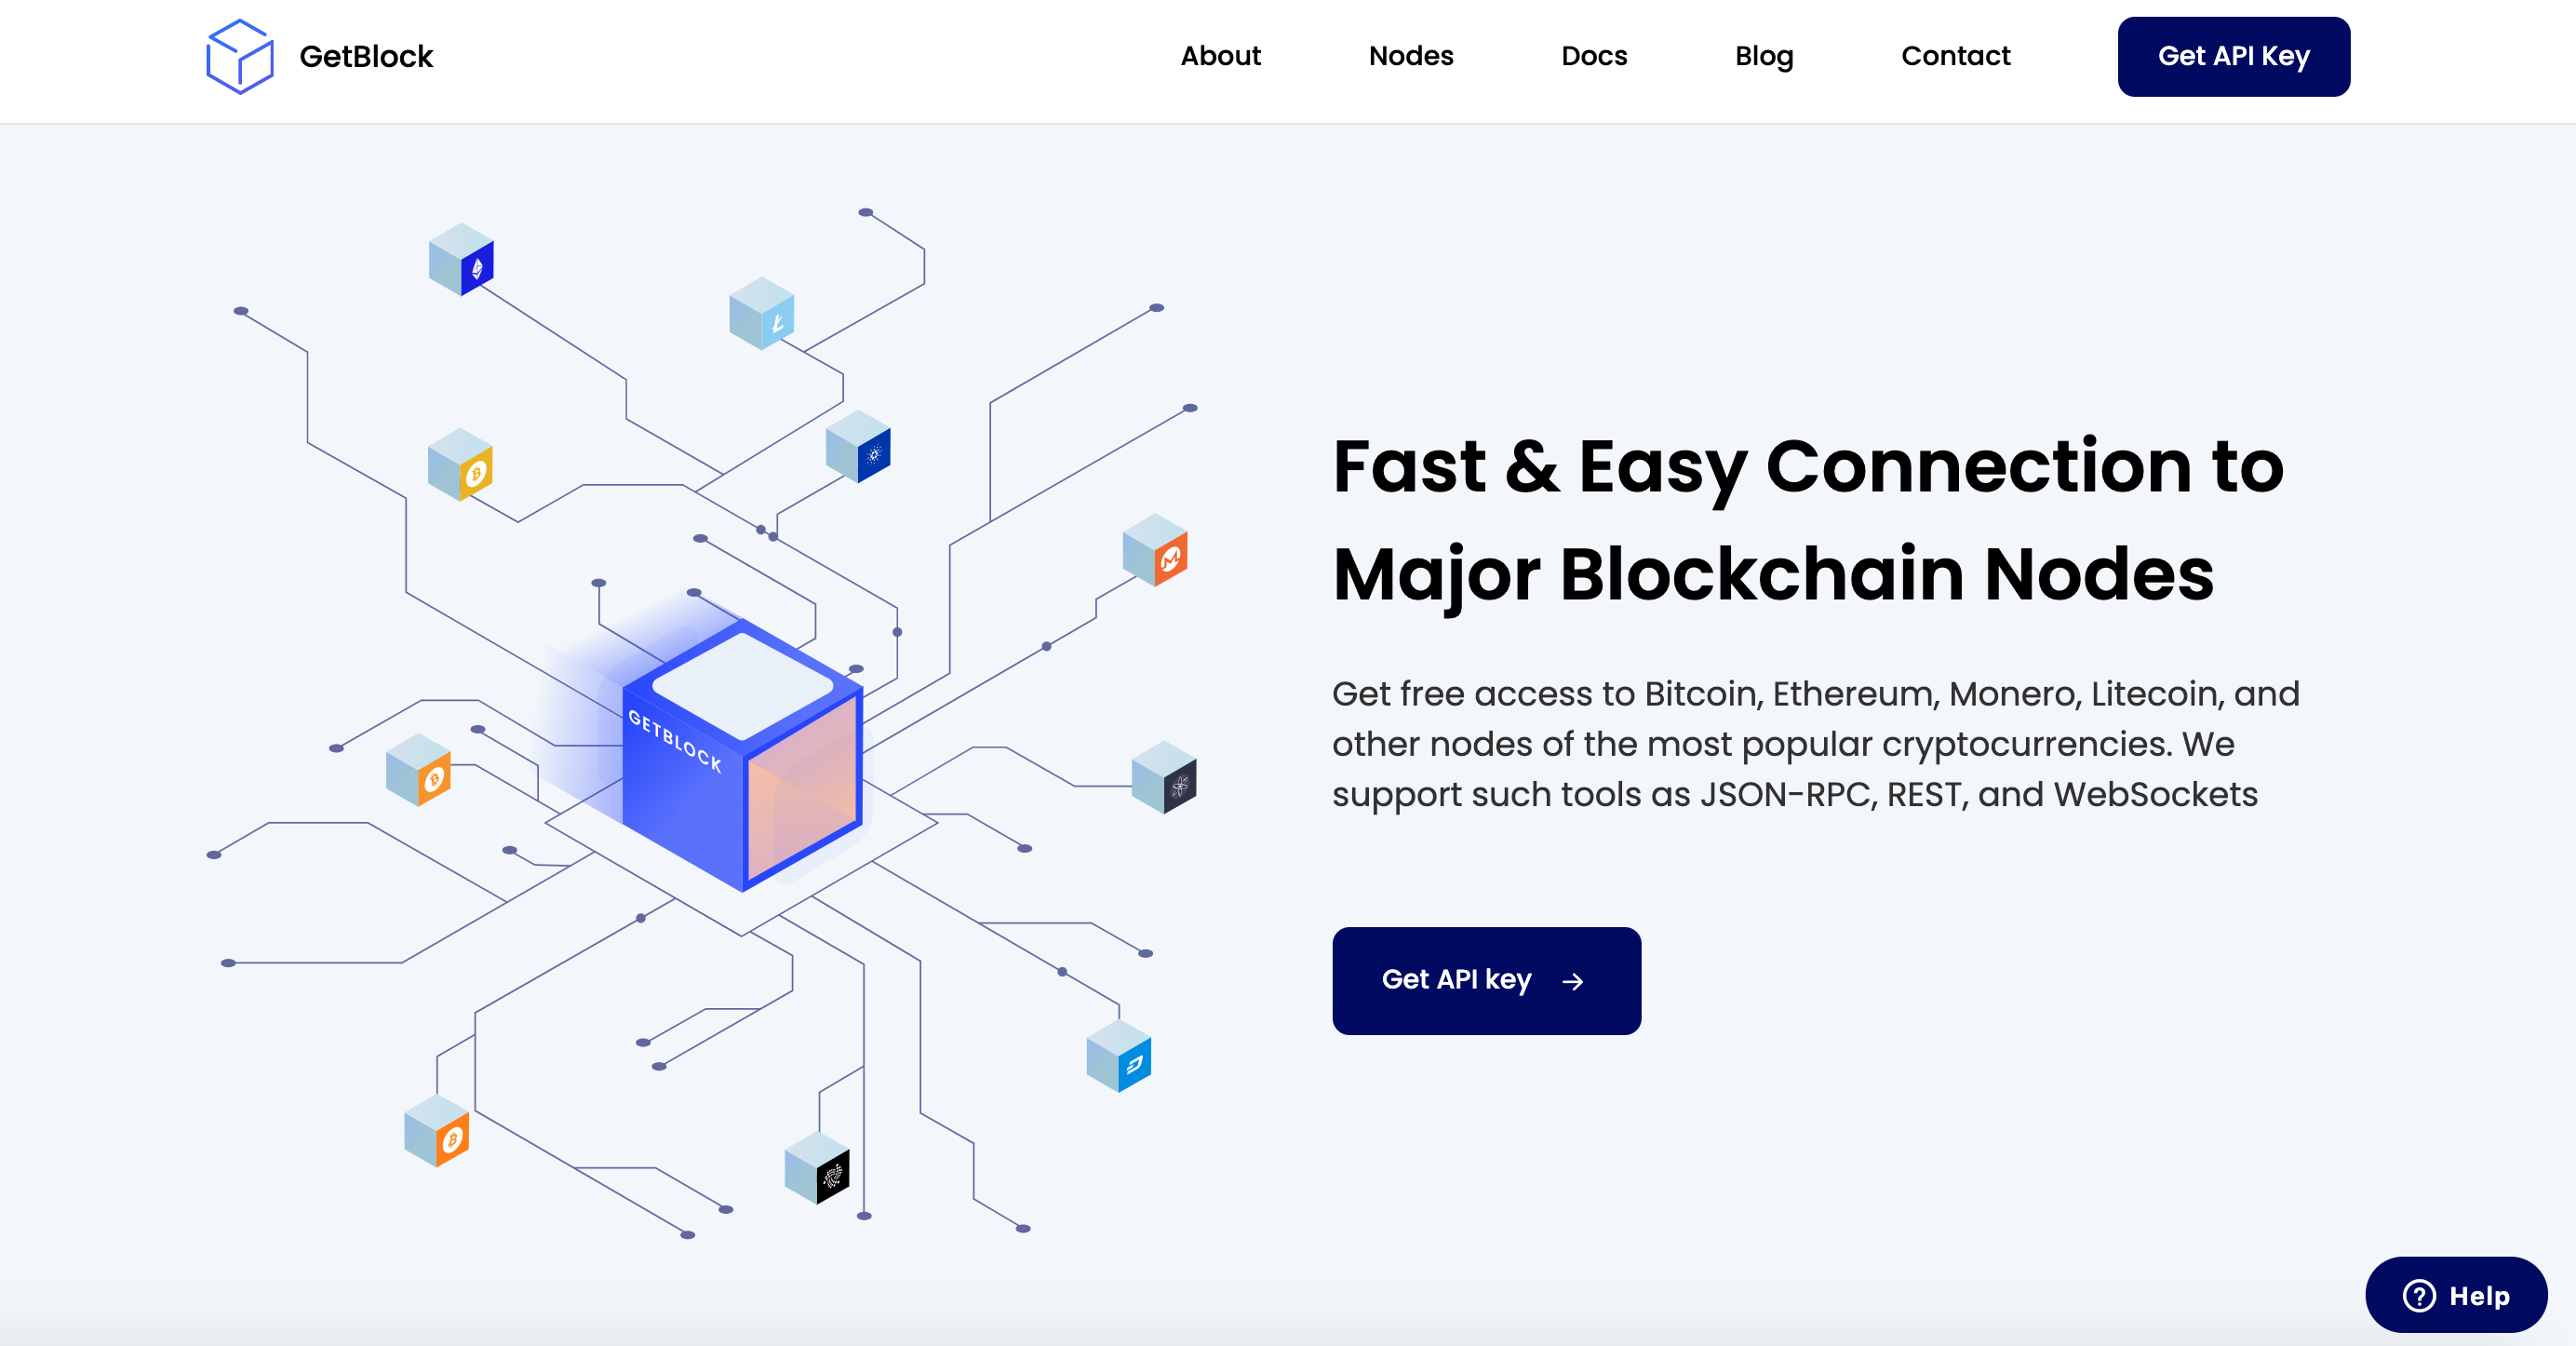 GetBlock Nodes Provider Launches the Updated Version of the Website